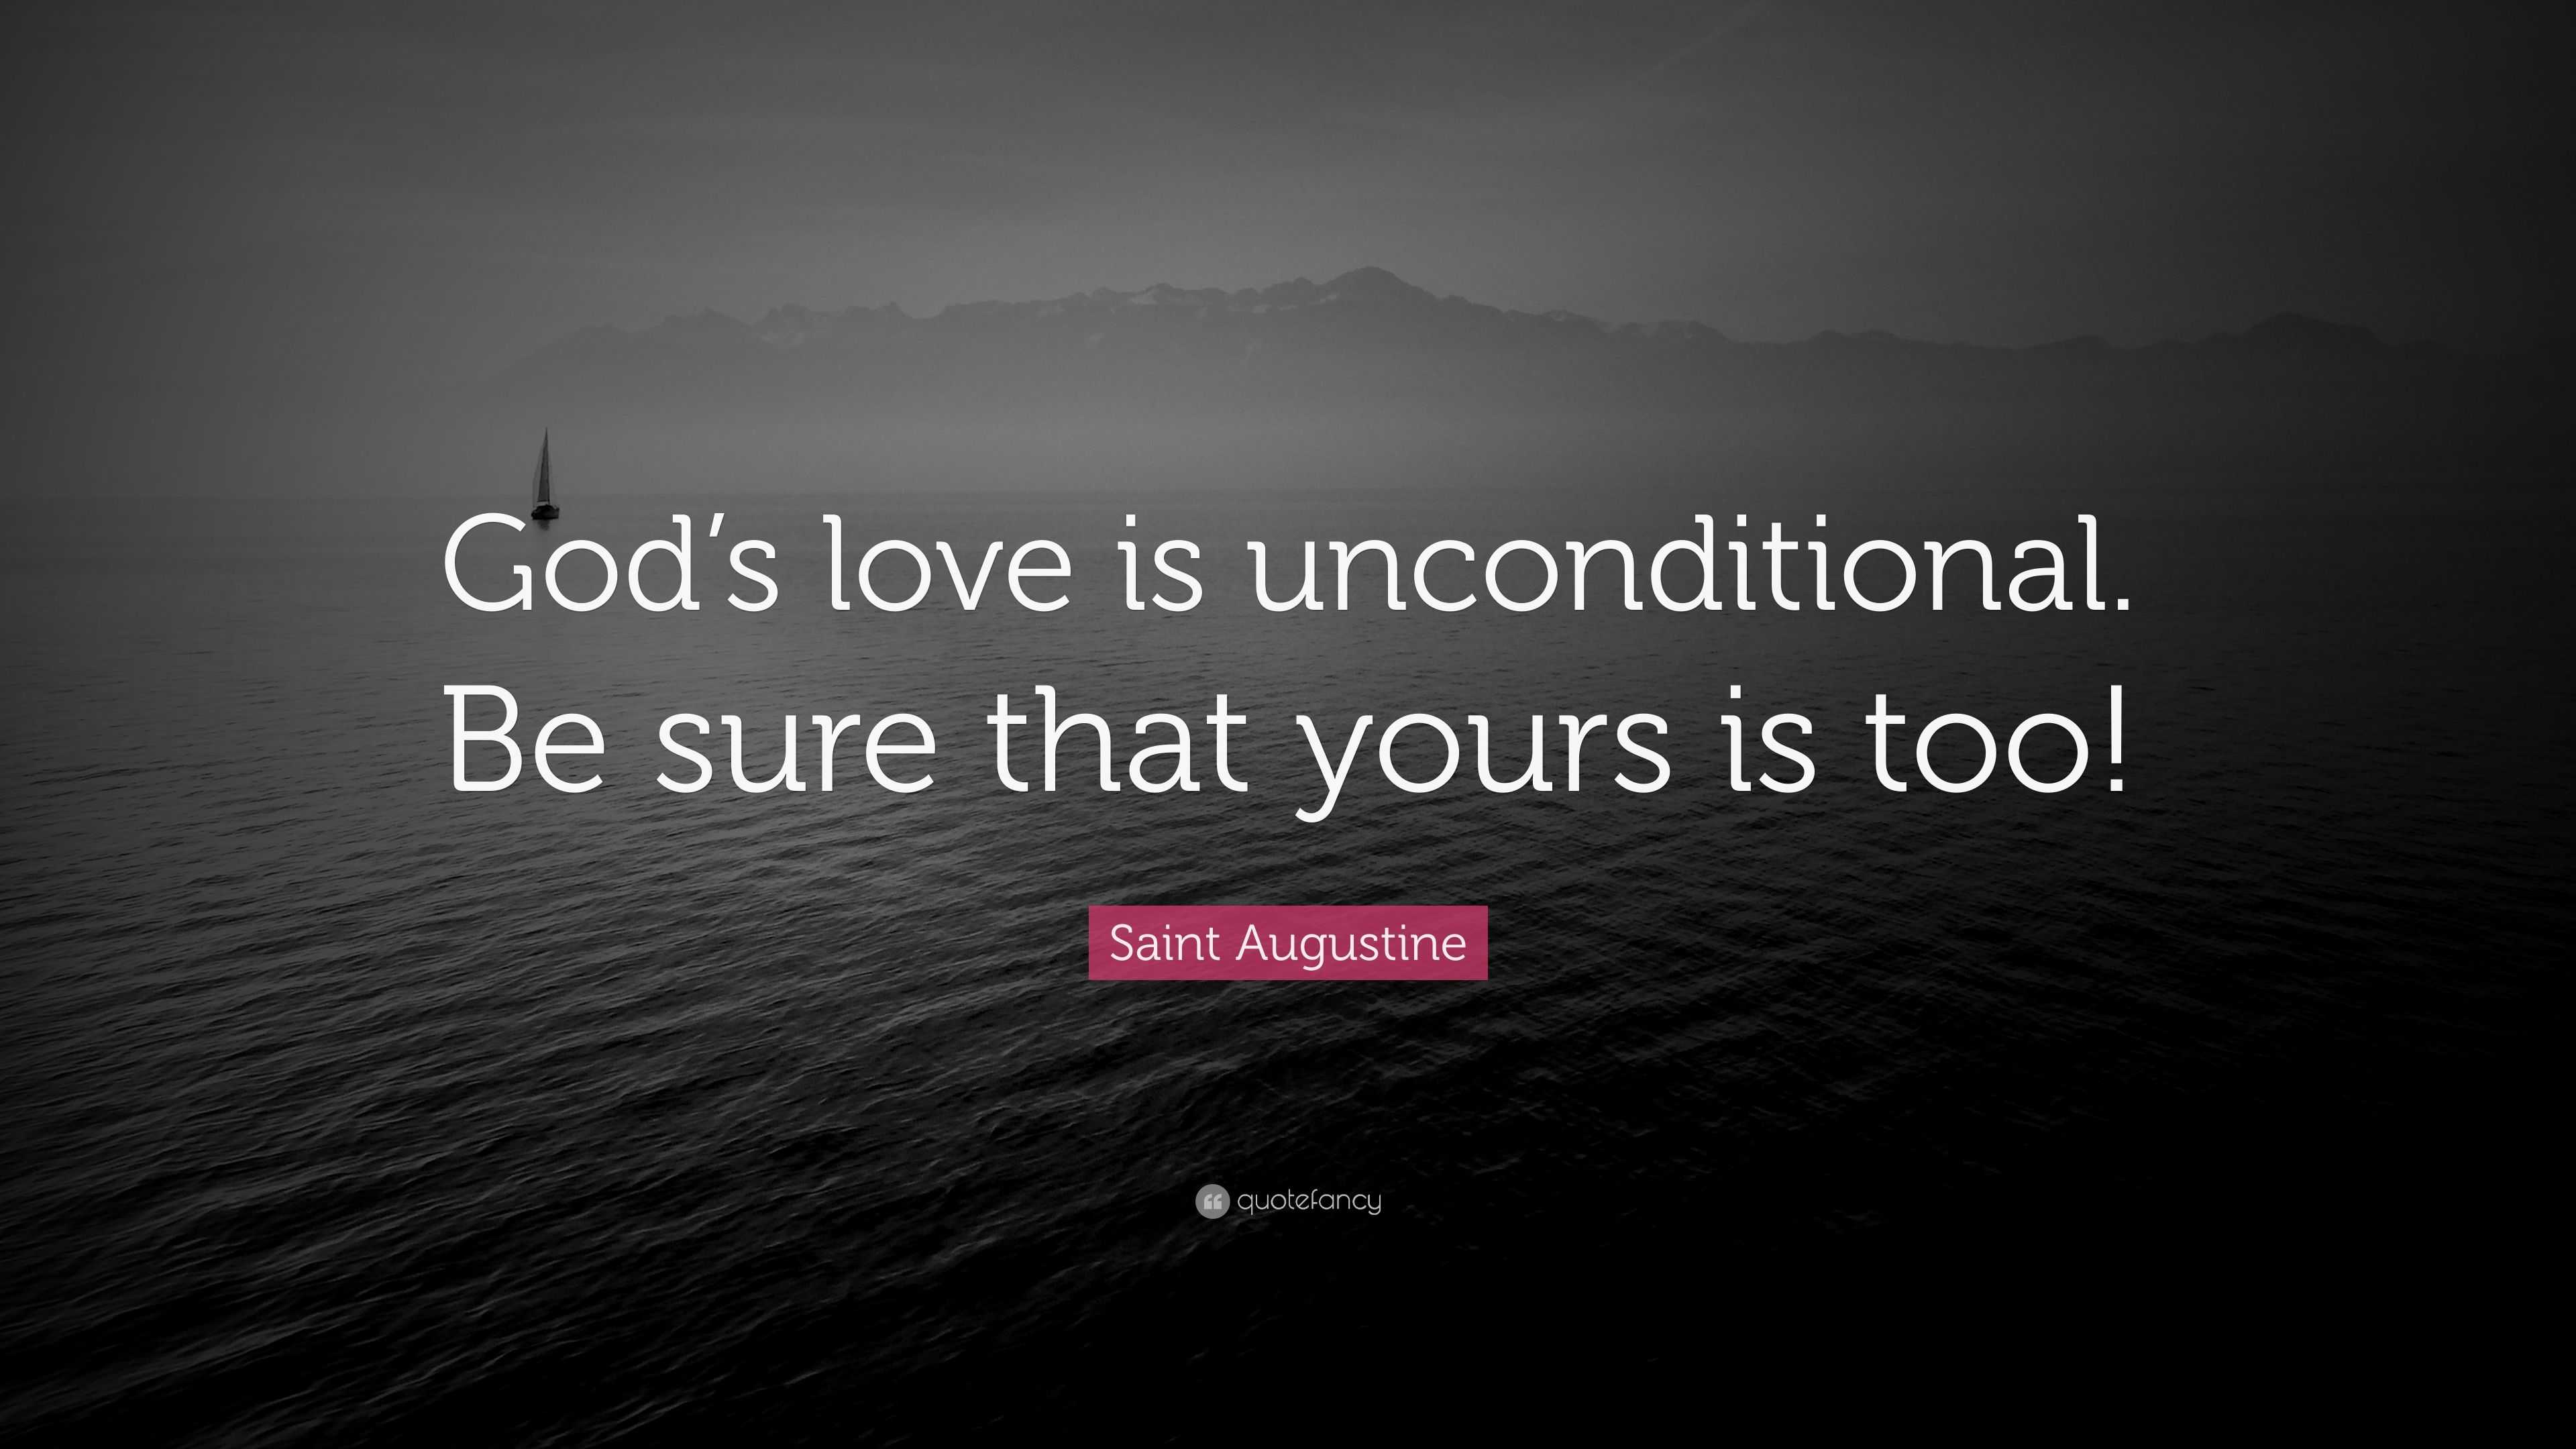 Saint Augustine Quote “God’s love is unconditional. Be